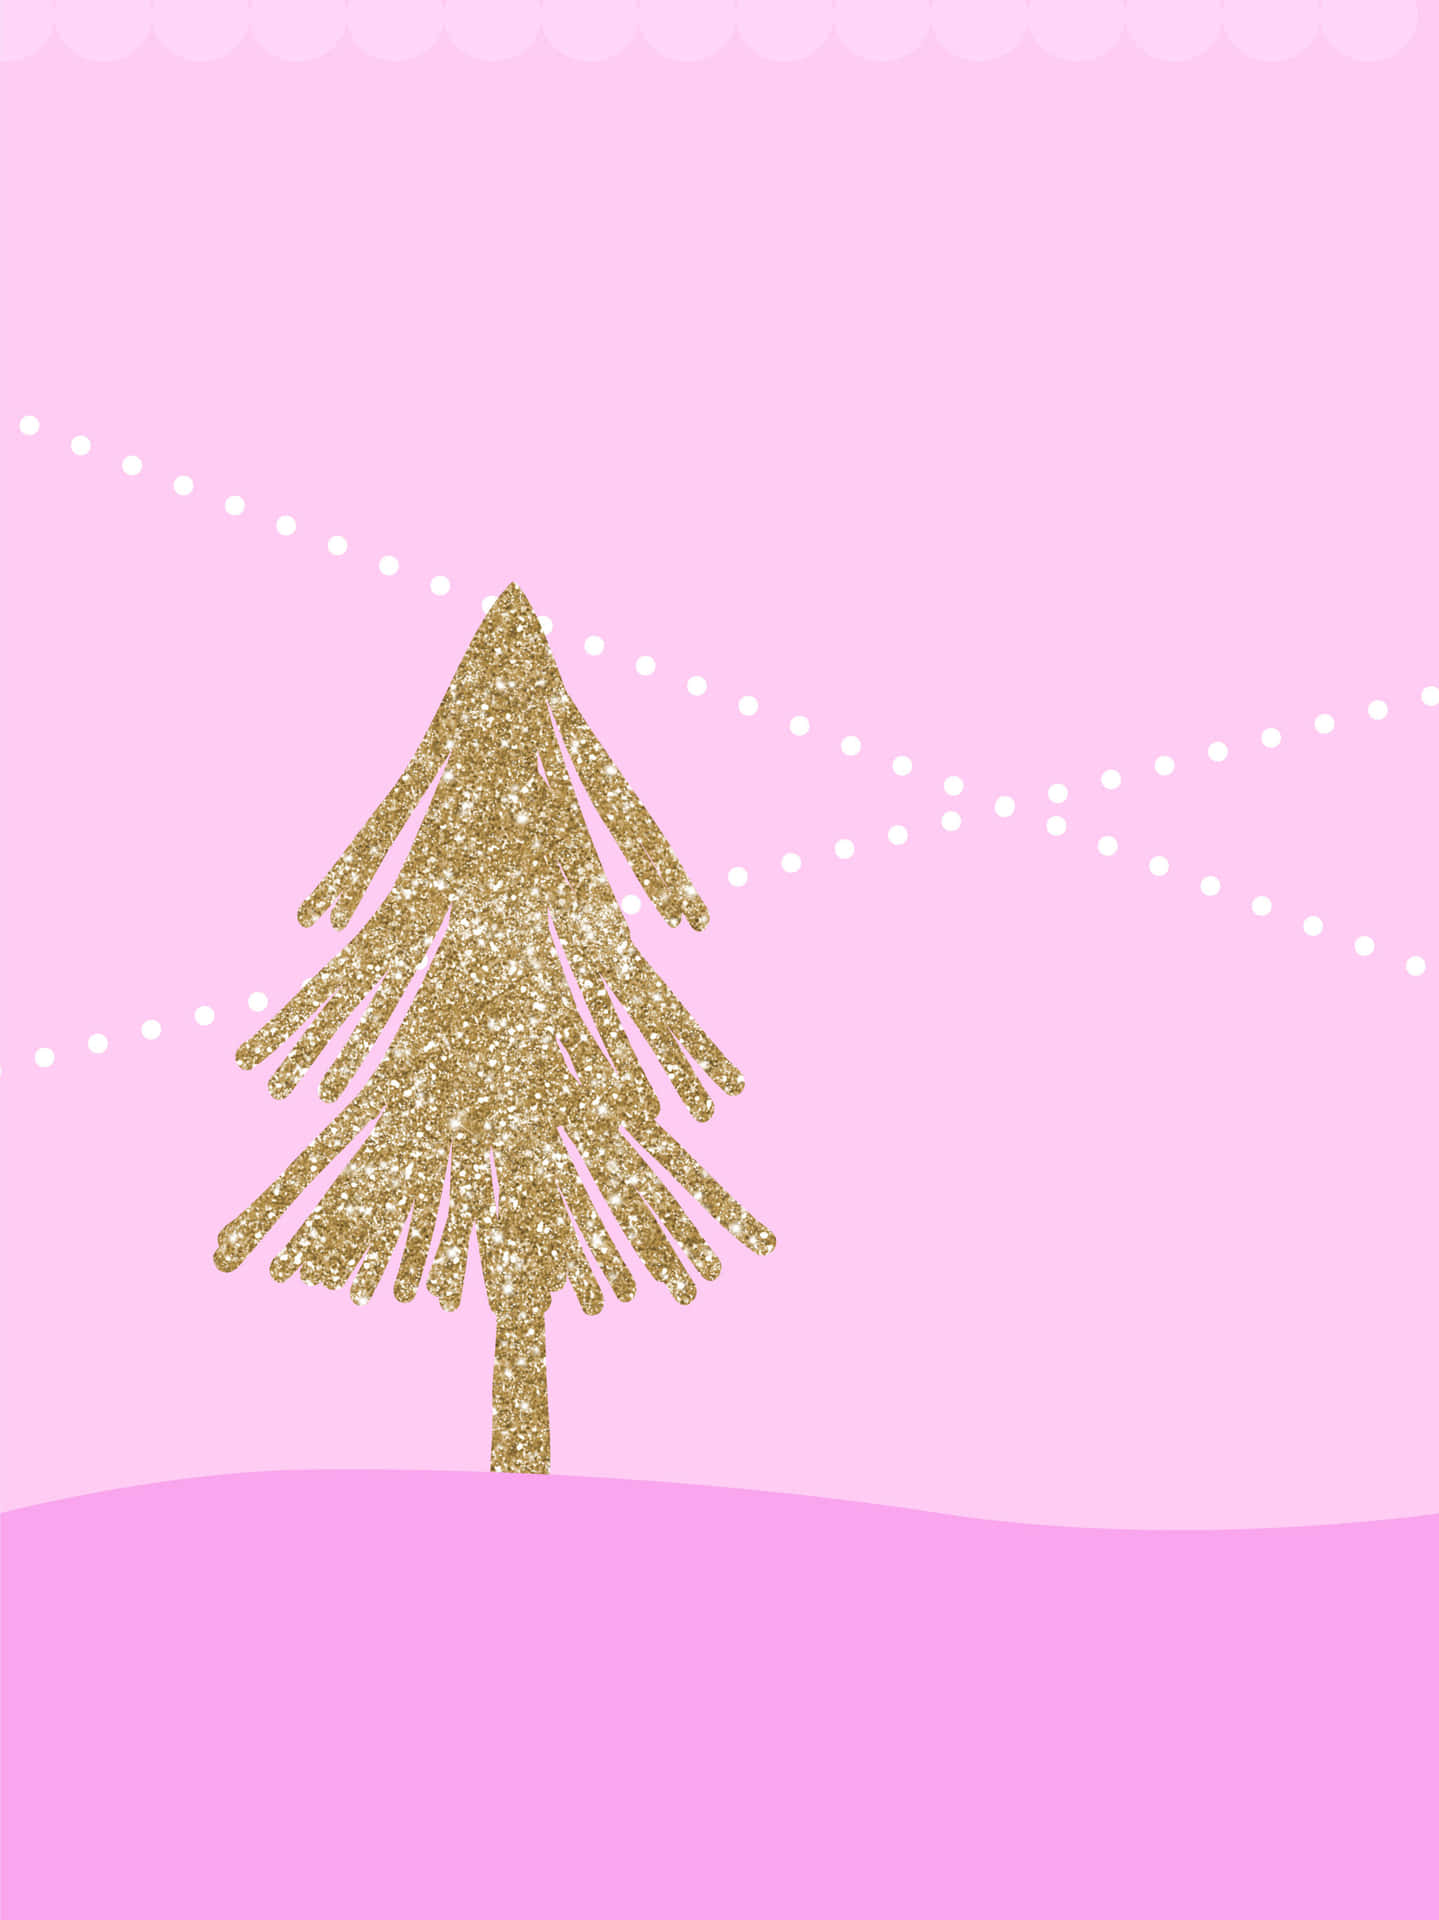 A Christmas Tree On A Pink Background Wallpaper